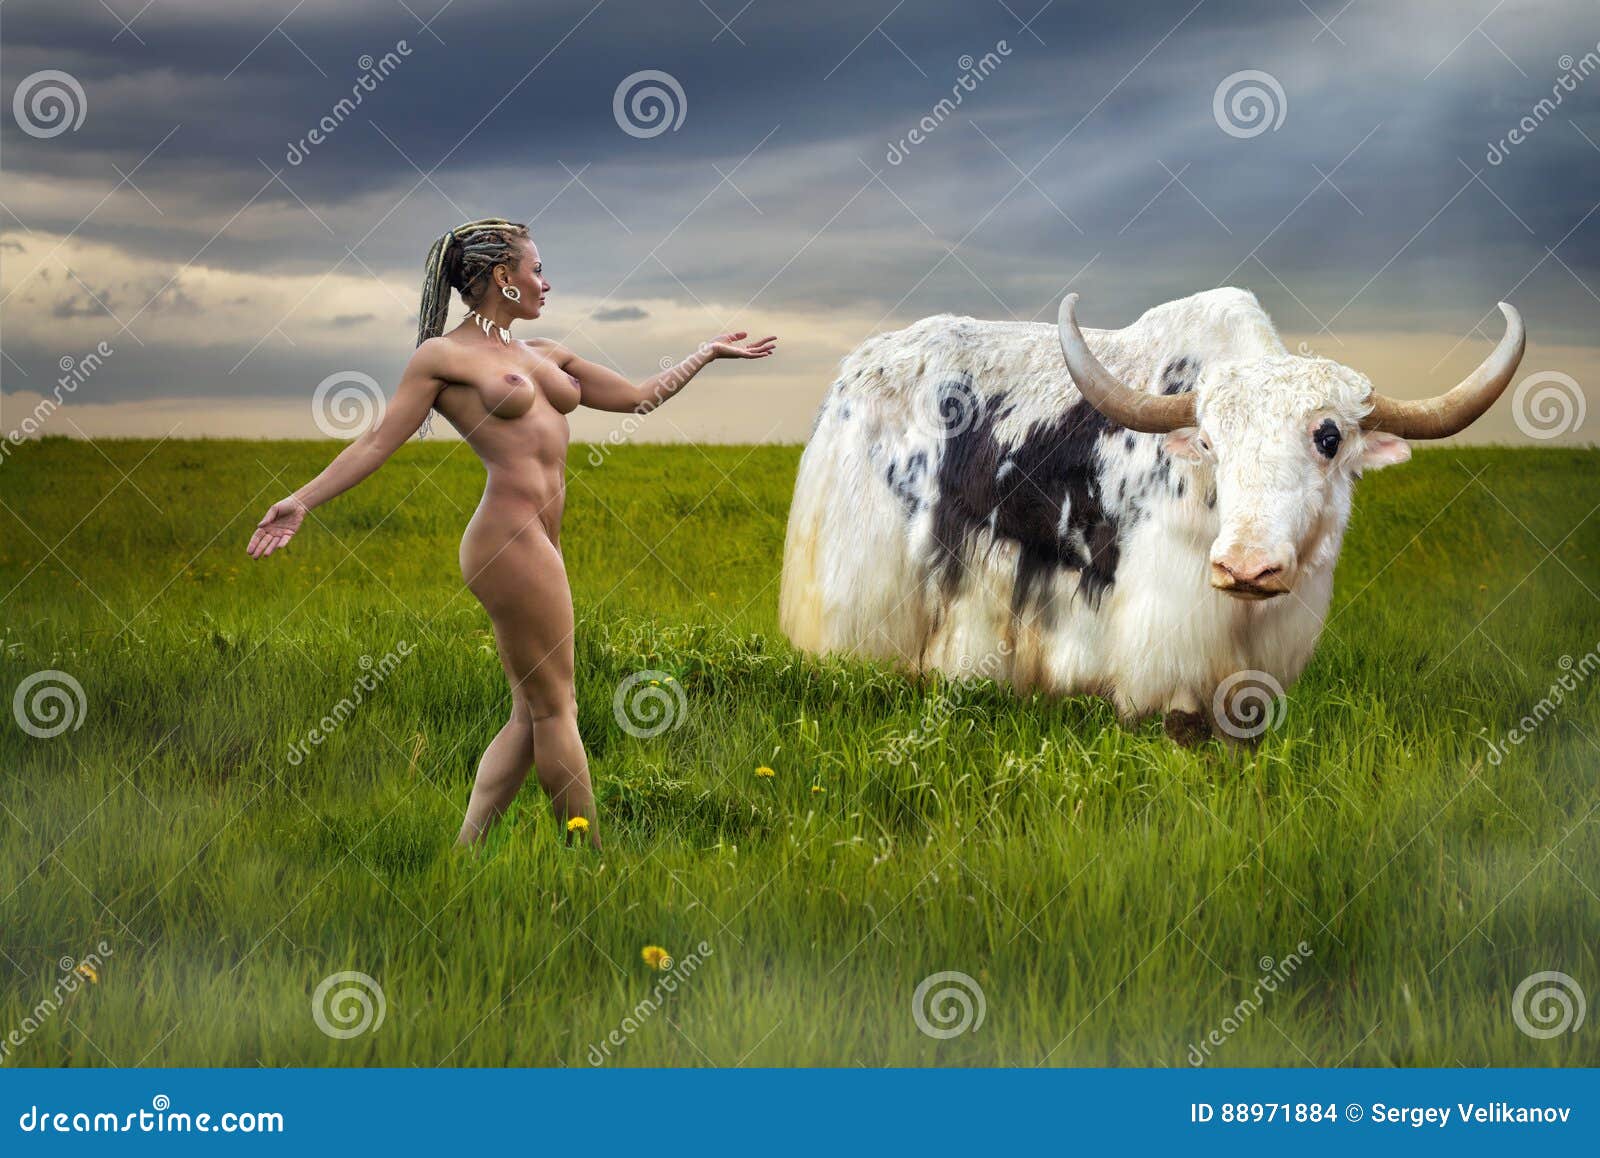 Best of Nude woman on bull